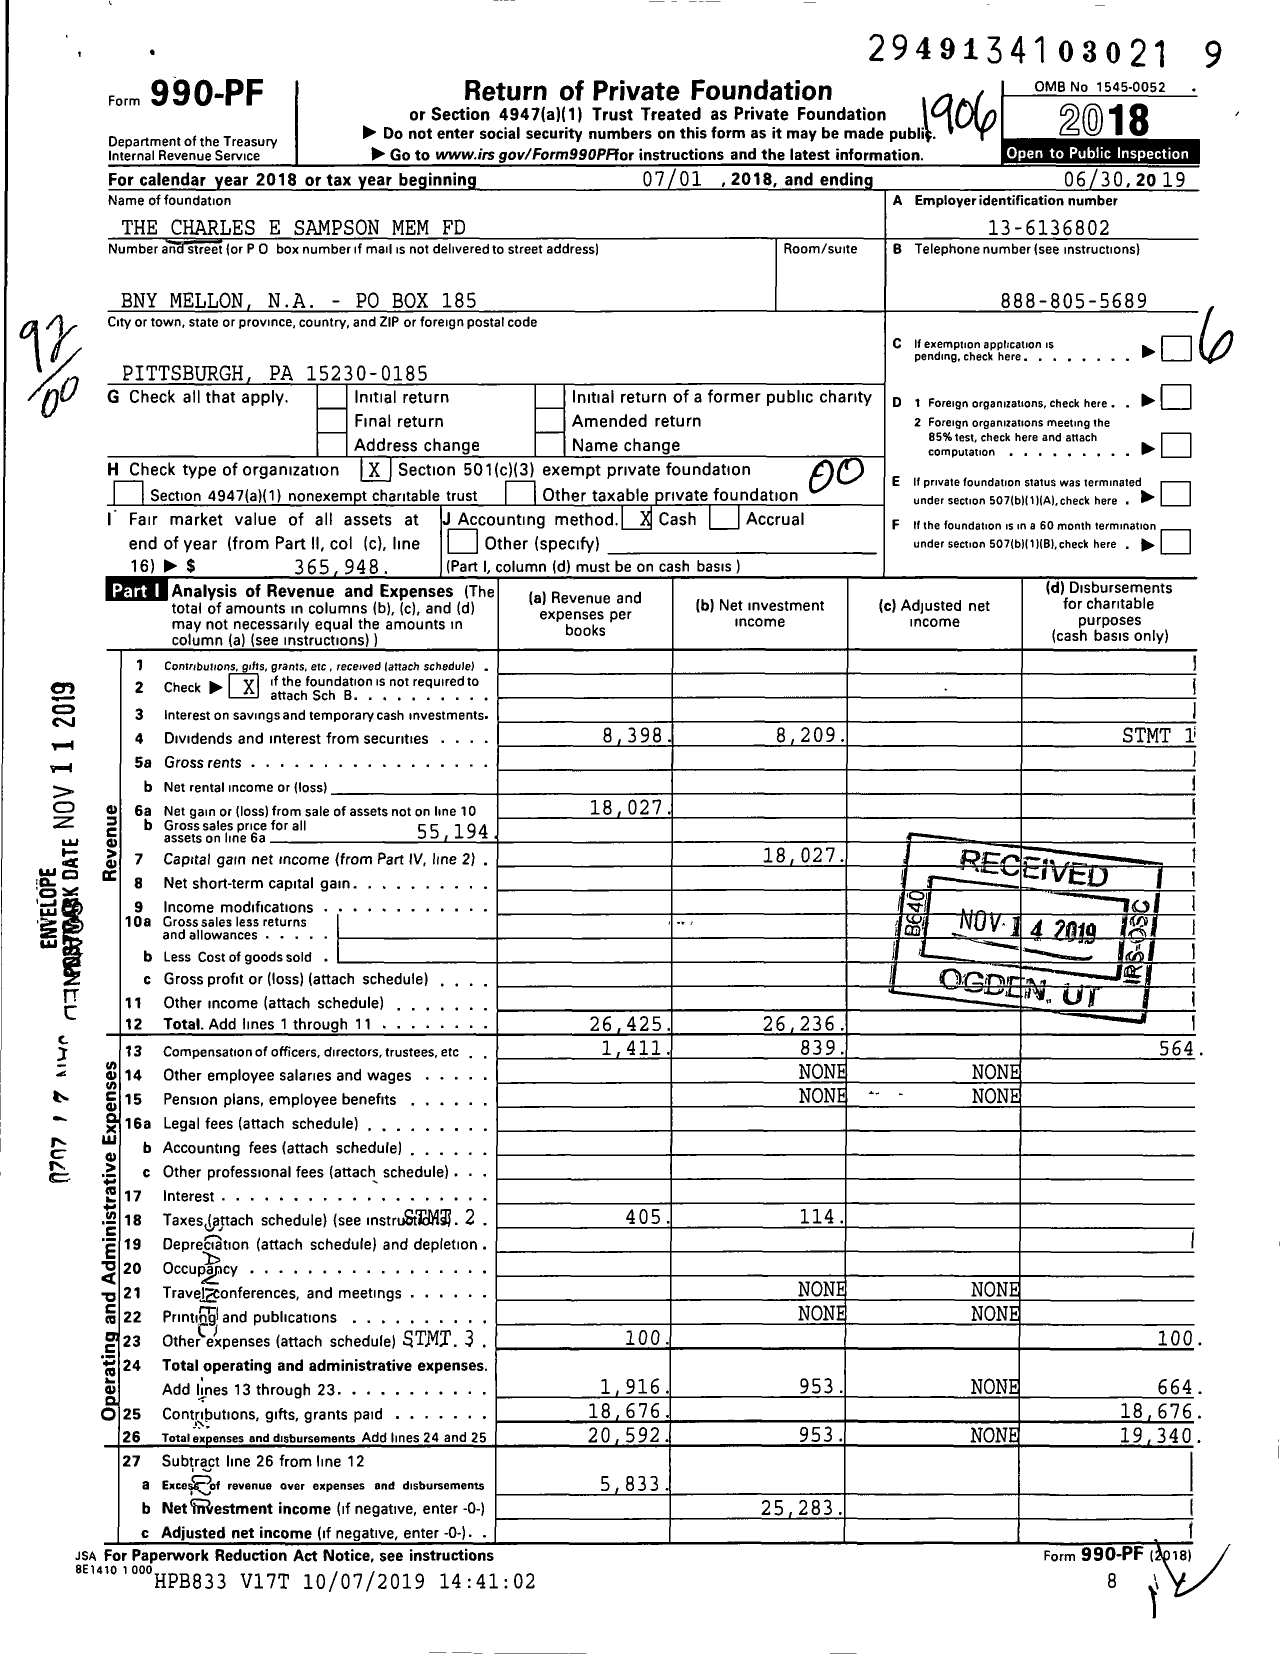 Image of first page of 2018 Form 990PF for The Charles E Sampson Mem Fund